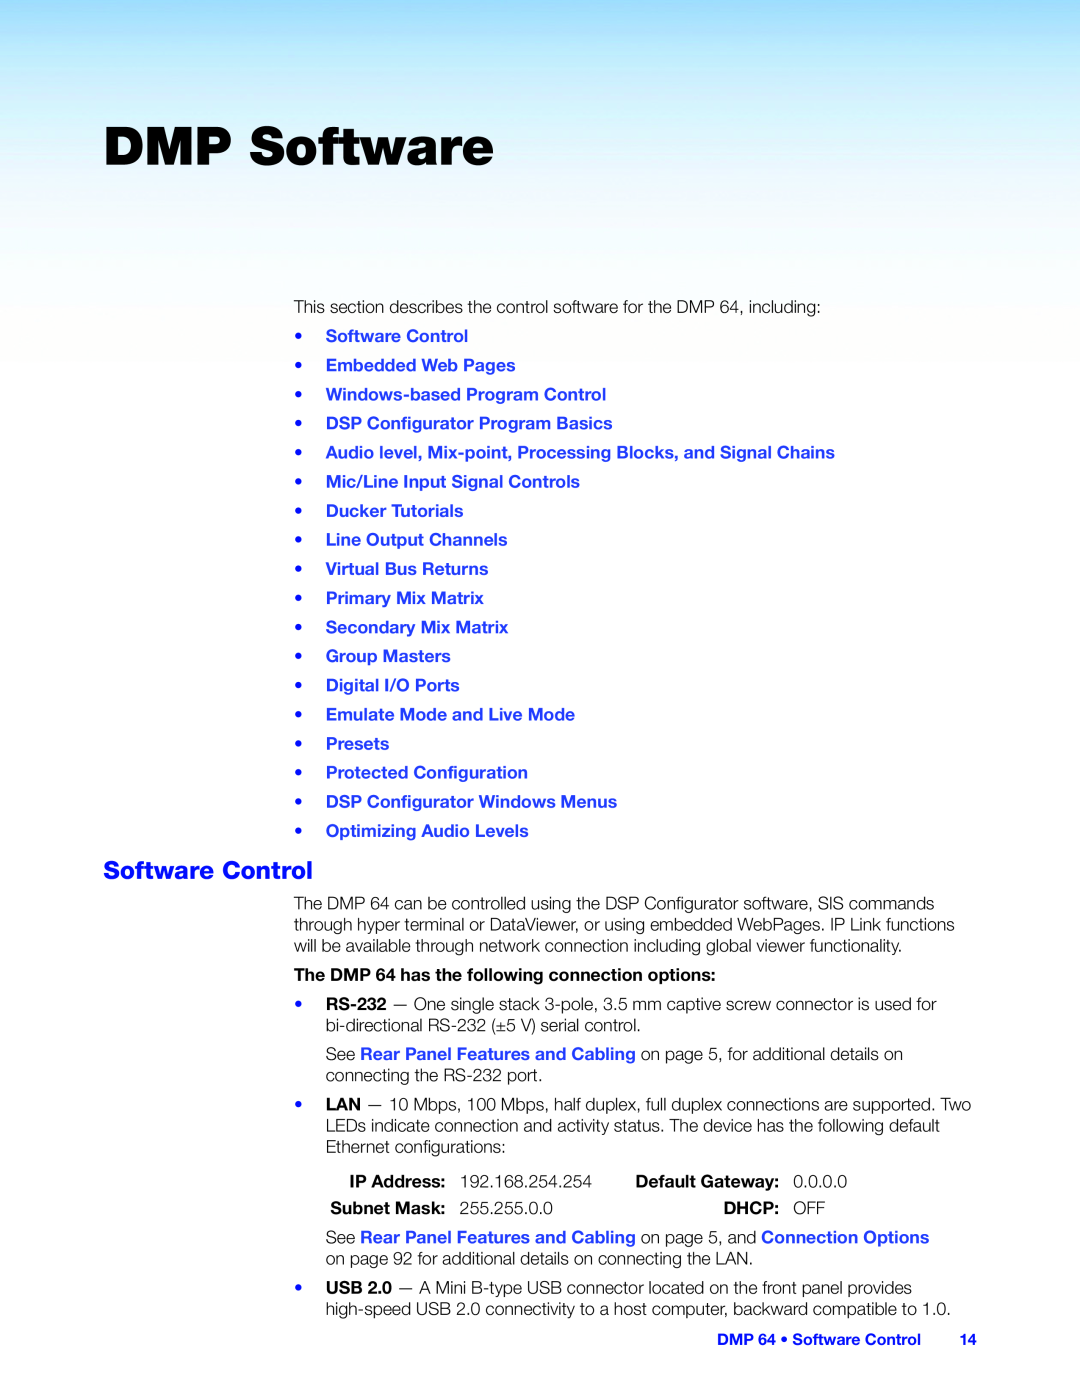 Extron electronic DMP 64 DMP Software, •Software Control •Embedded Web Pages, •Windows-basedProgram Control, 0.0.0.0 